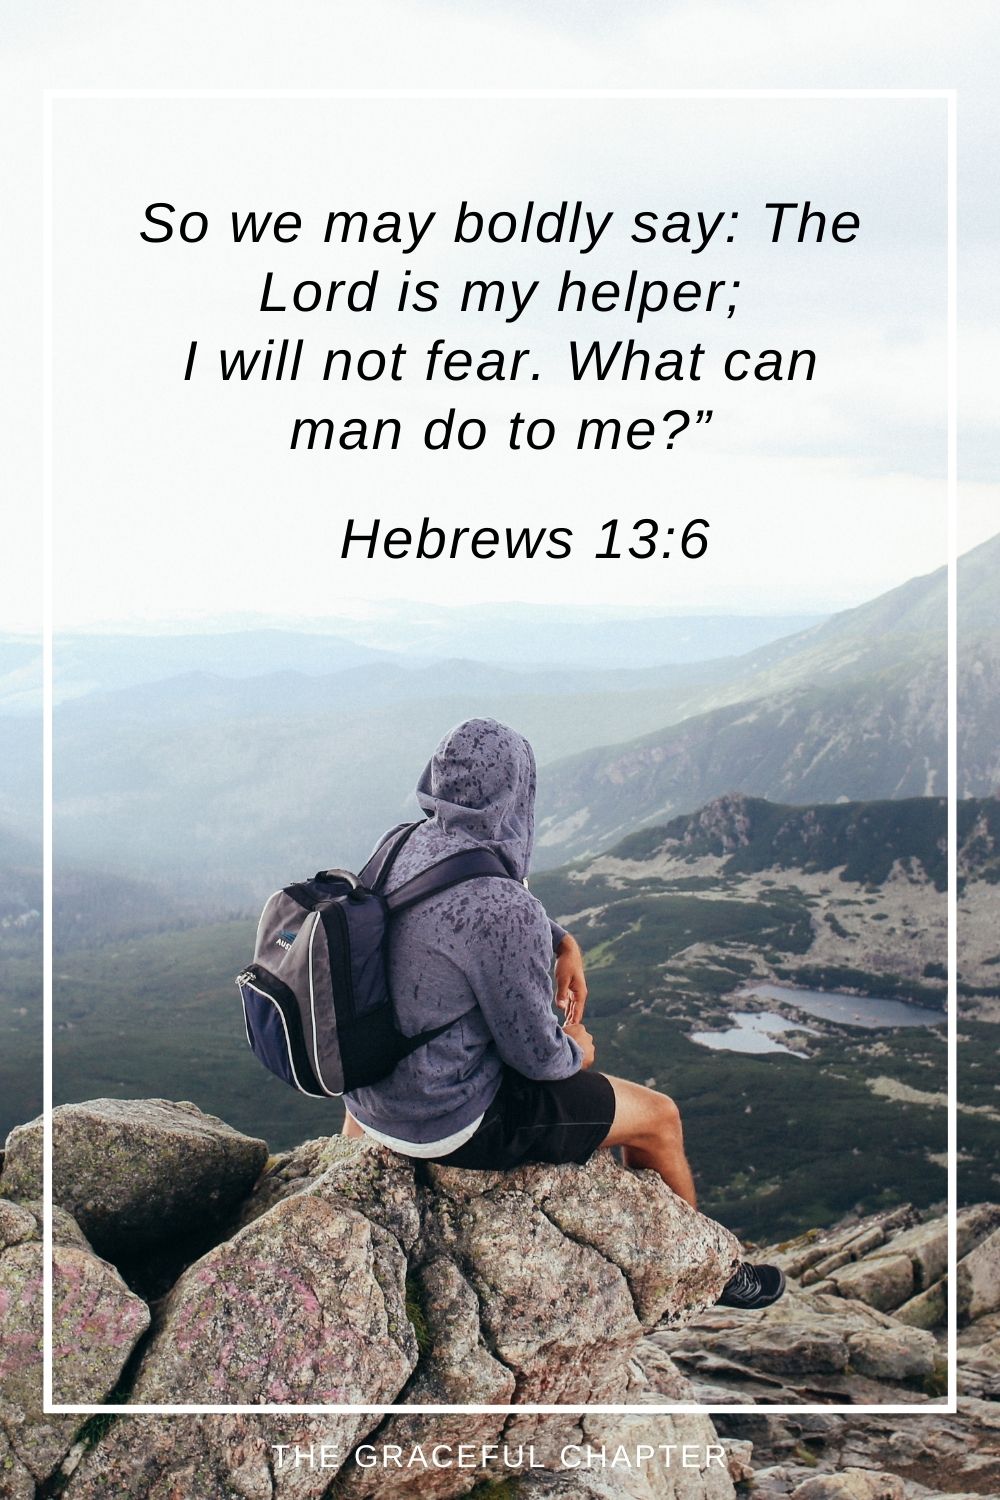 So we may boldly say: The Lord is my helper; I will not fear. What can man do to me?” Hebrews 13:6